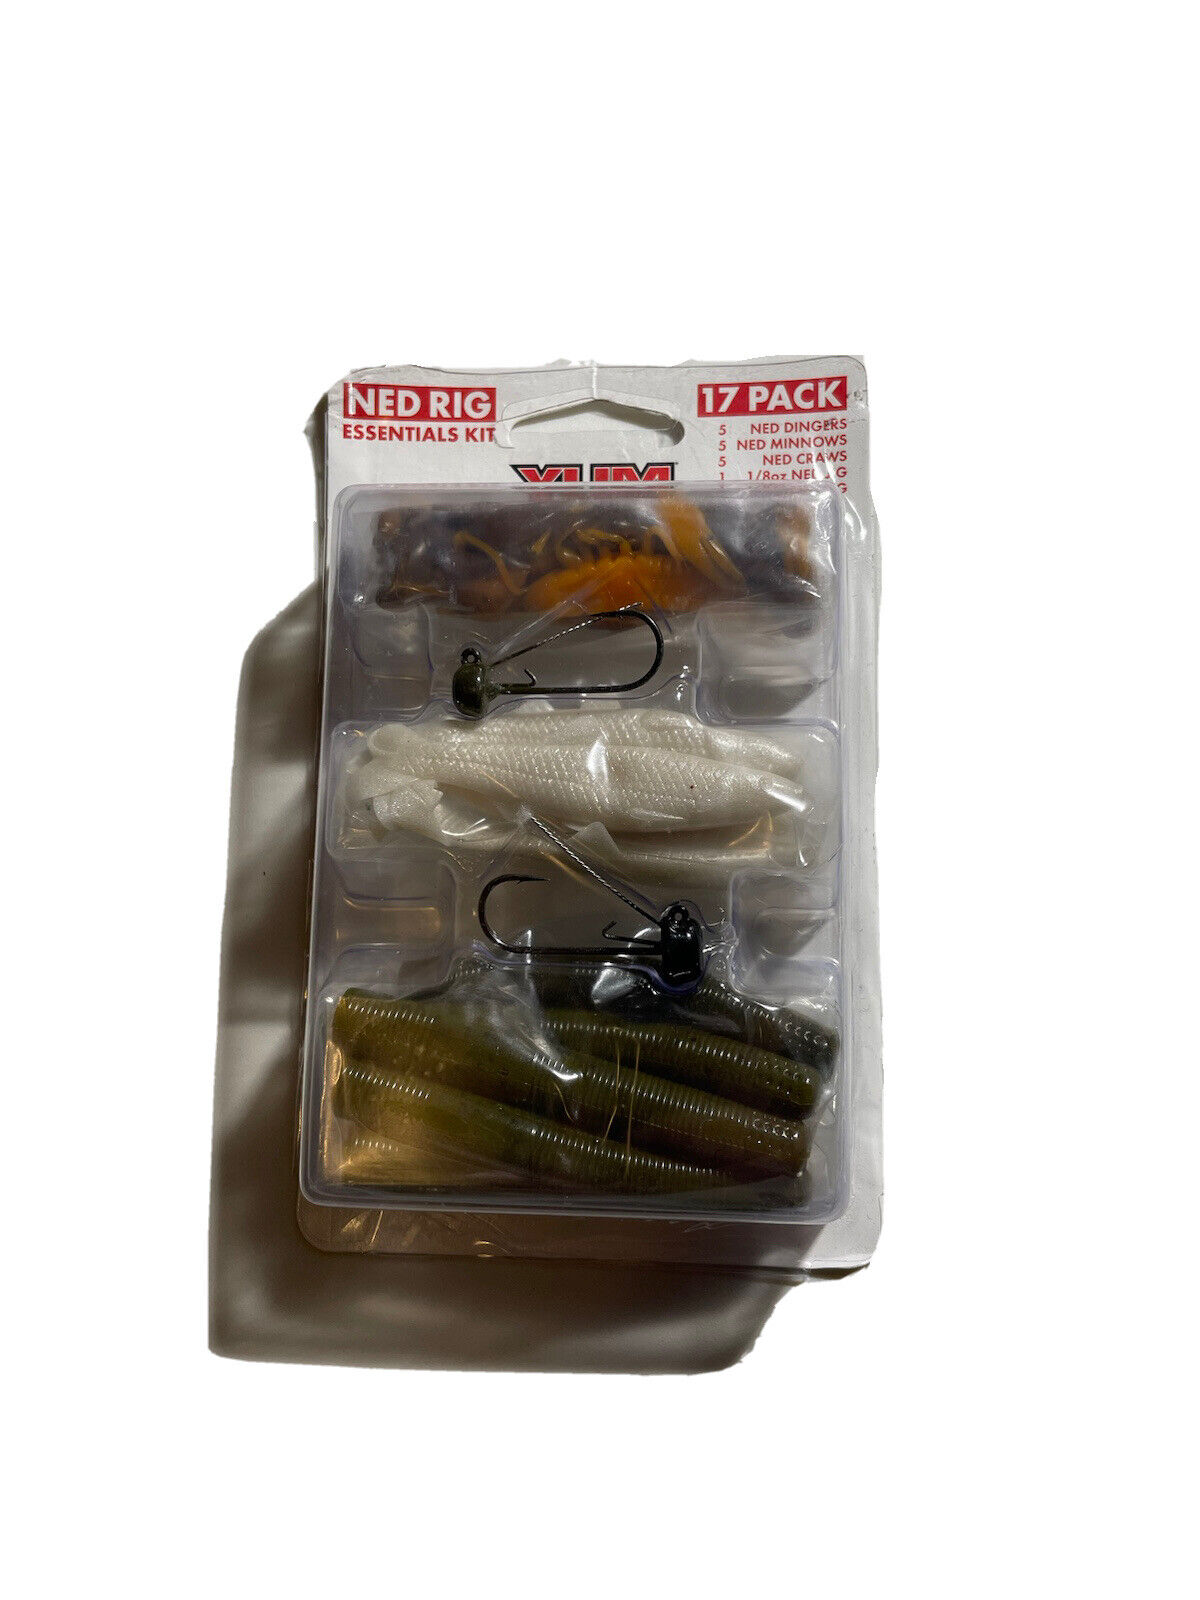 YUM Ned Rig Kit 3-17 Piece w/ YUM Ned Dingers, Ned Craws, Ned Minnow, &  Jigheads